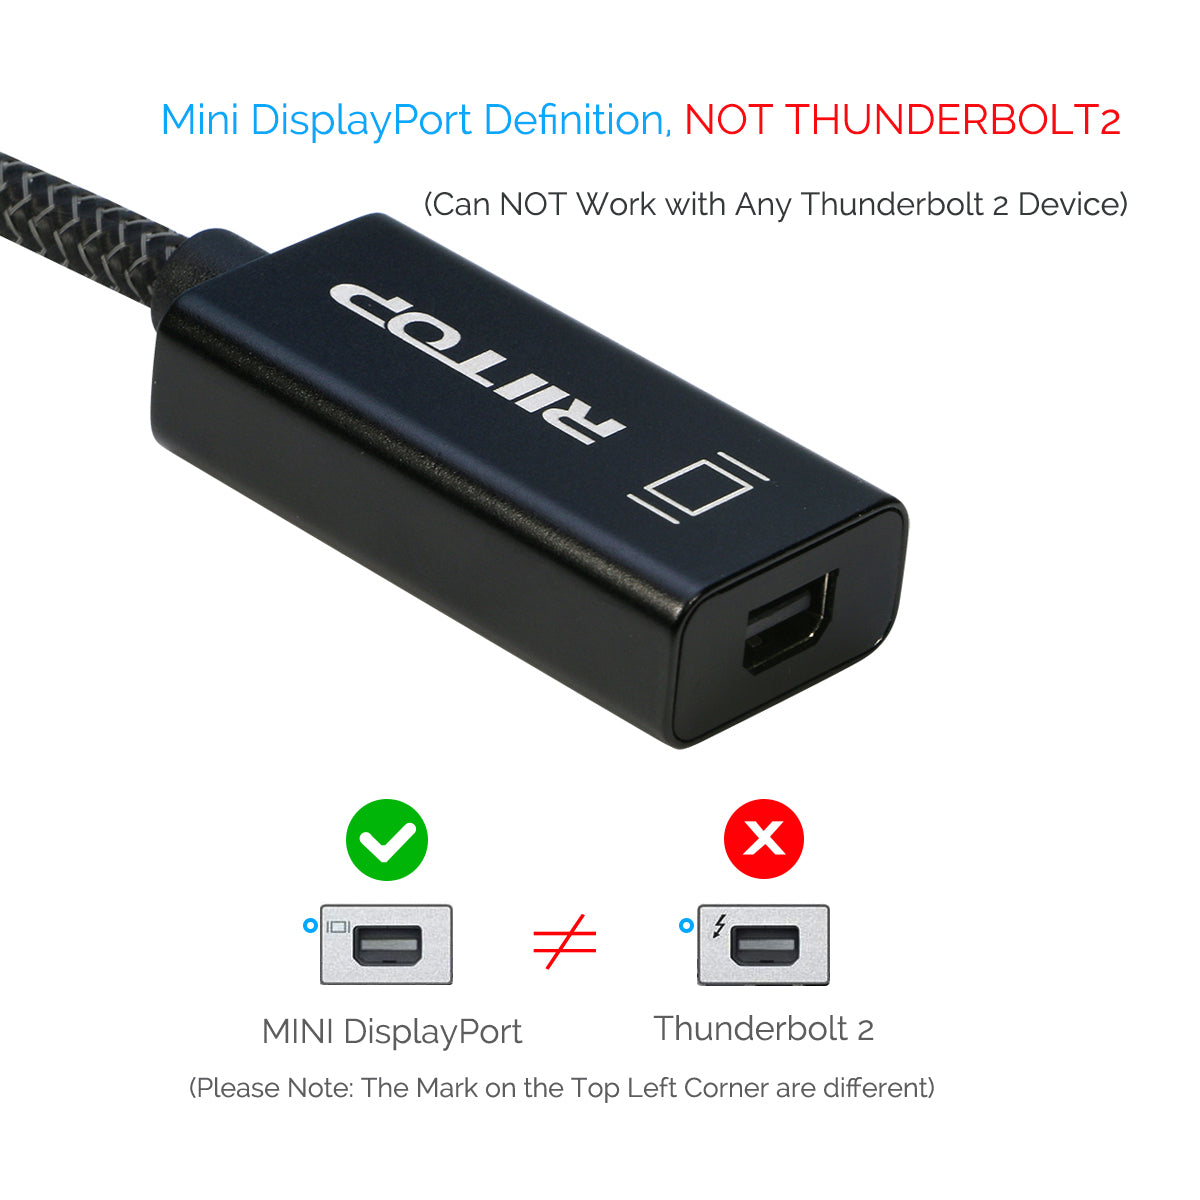 Cable Matters Long USB C to HDMI Cable (USB-C to HDMI Cable) Supporting 4K  60Hz in Black 10 ft - Thunderbolt 3 Port Compatible with MacBook Pro, Dell